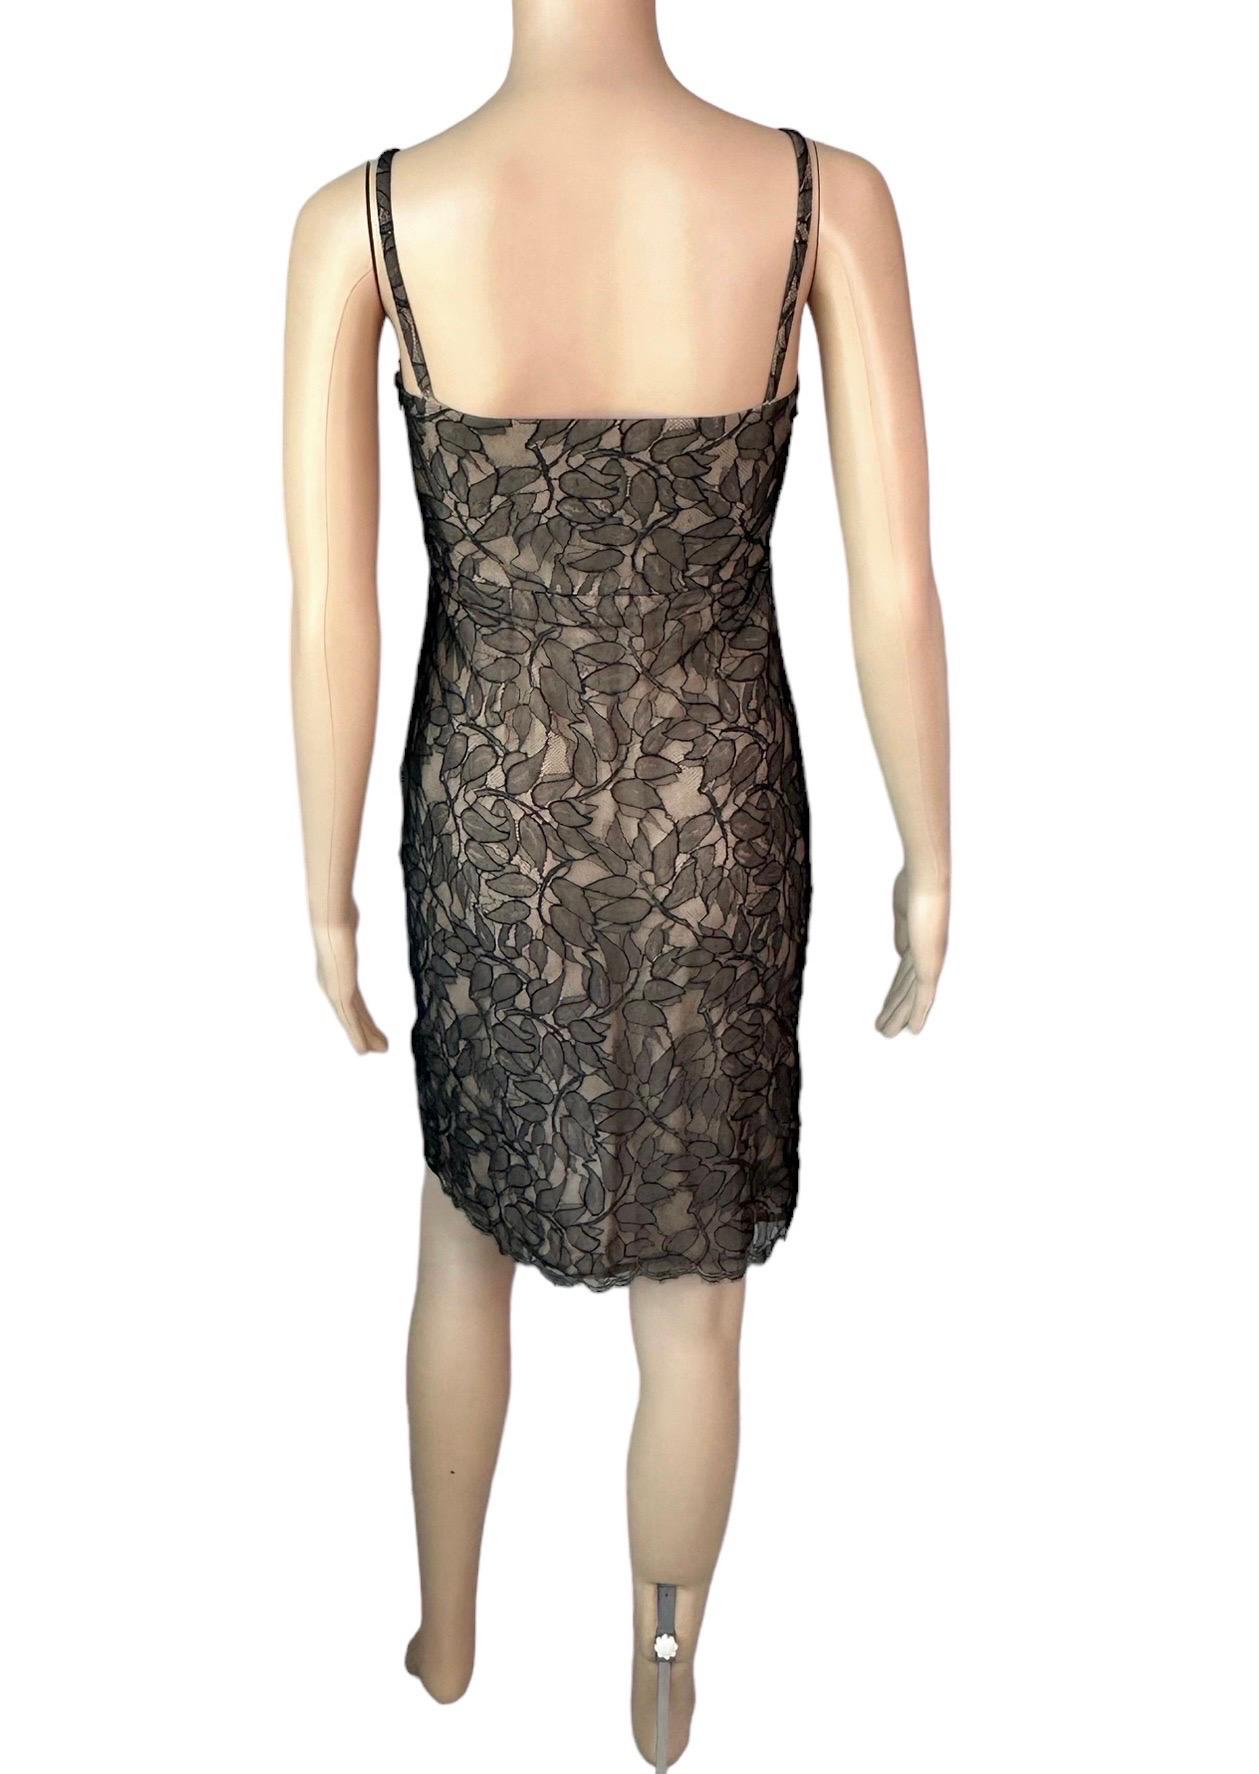 Gianni Versace Istante c. 1998 Sheer Lace Mini Dress For Sale 3